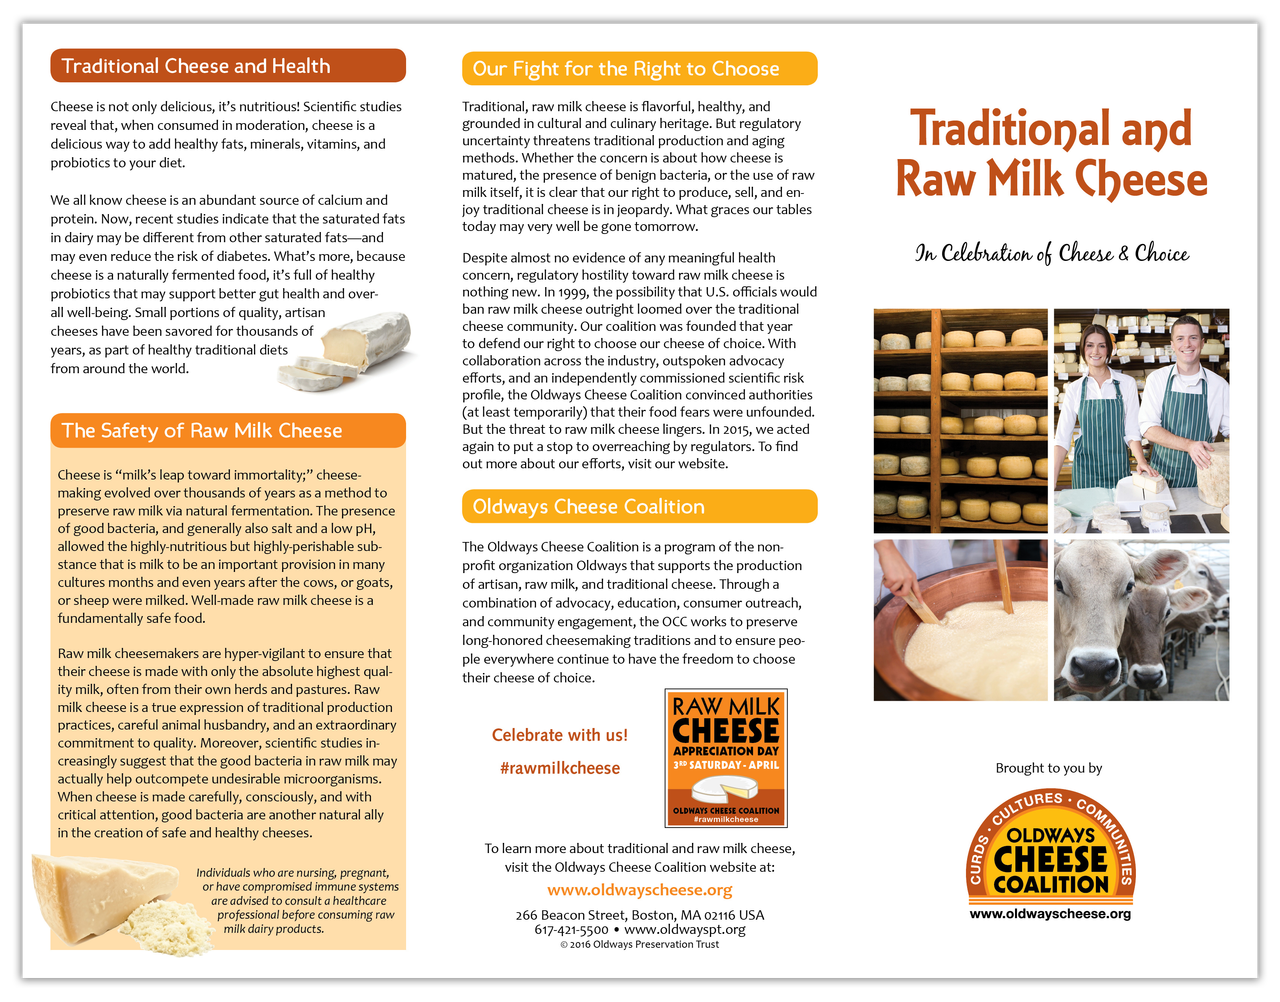 Why Are We Celebrating Raw Milk Cheese?